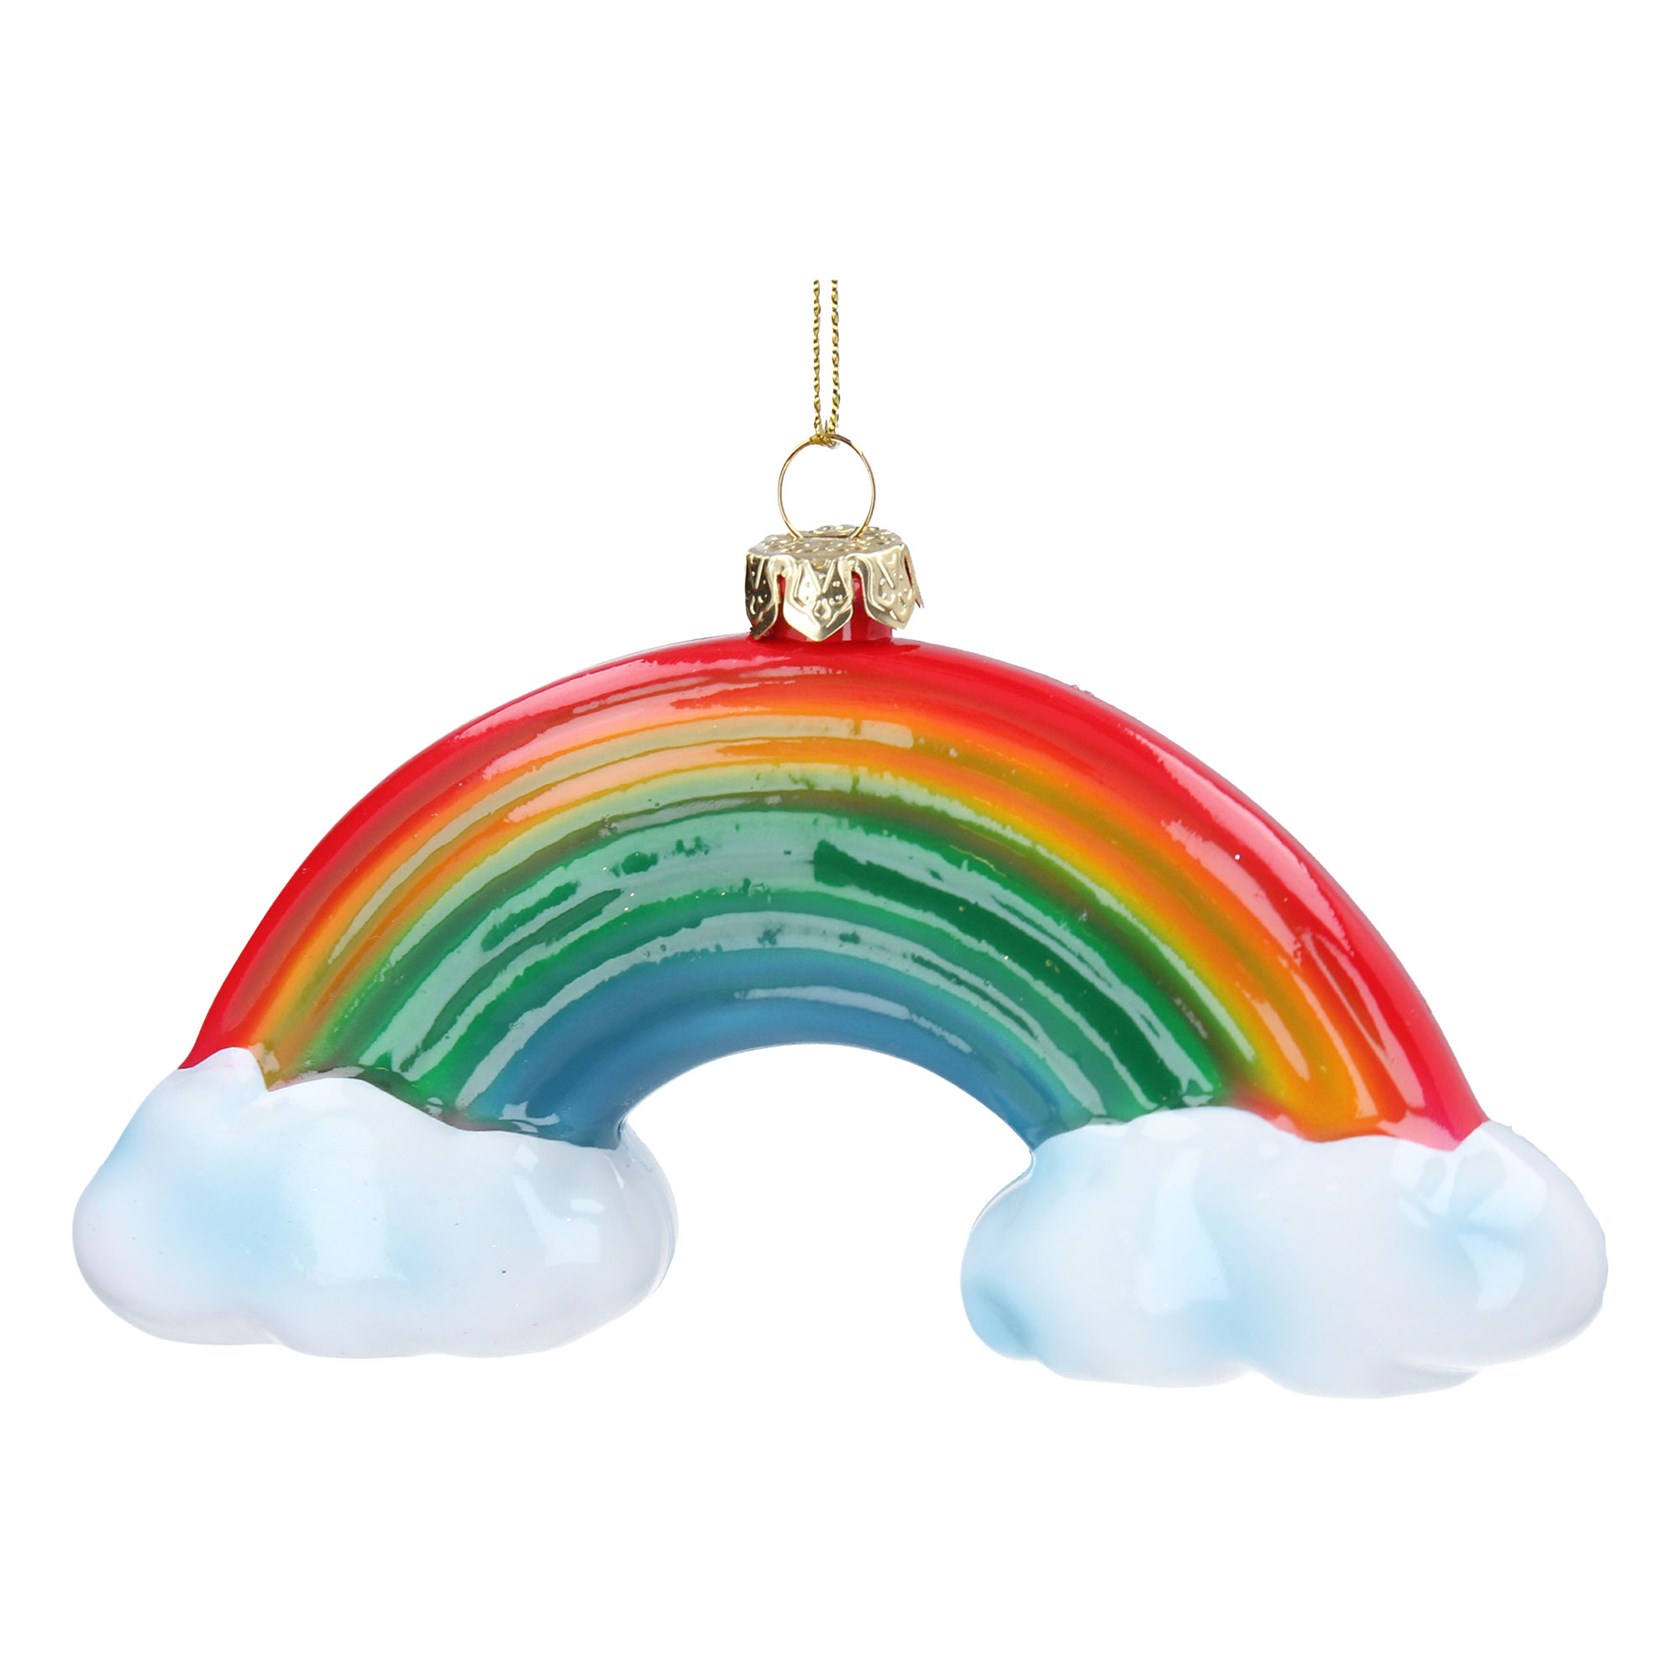 Rainbow and clouds acrylic hanging decoration. By Gisela Graham.